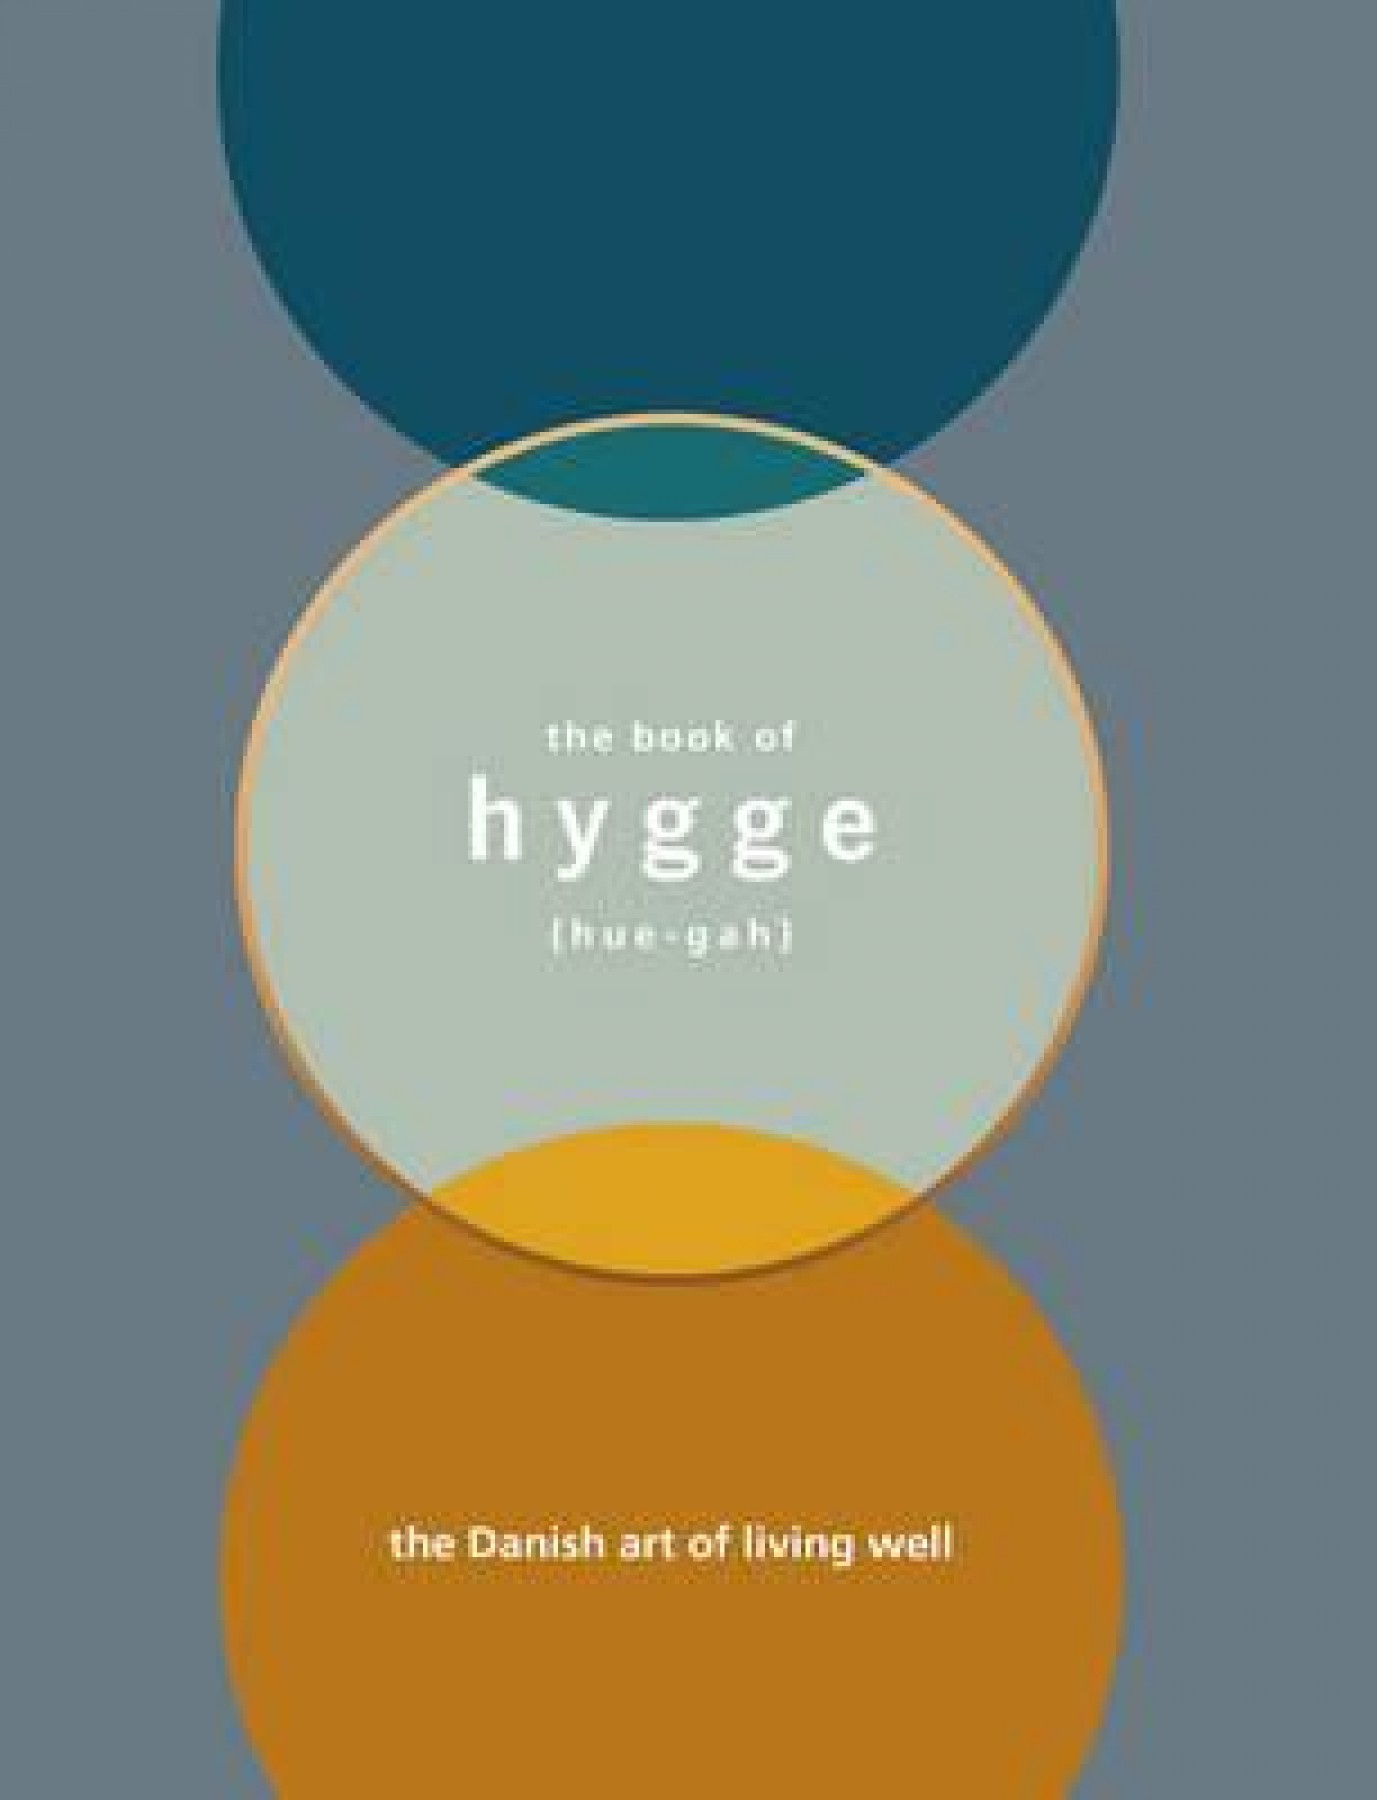 The book of hygge: The Danish art of living well